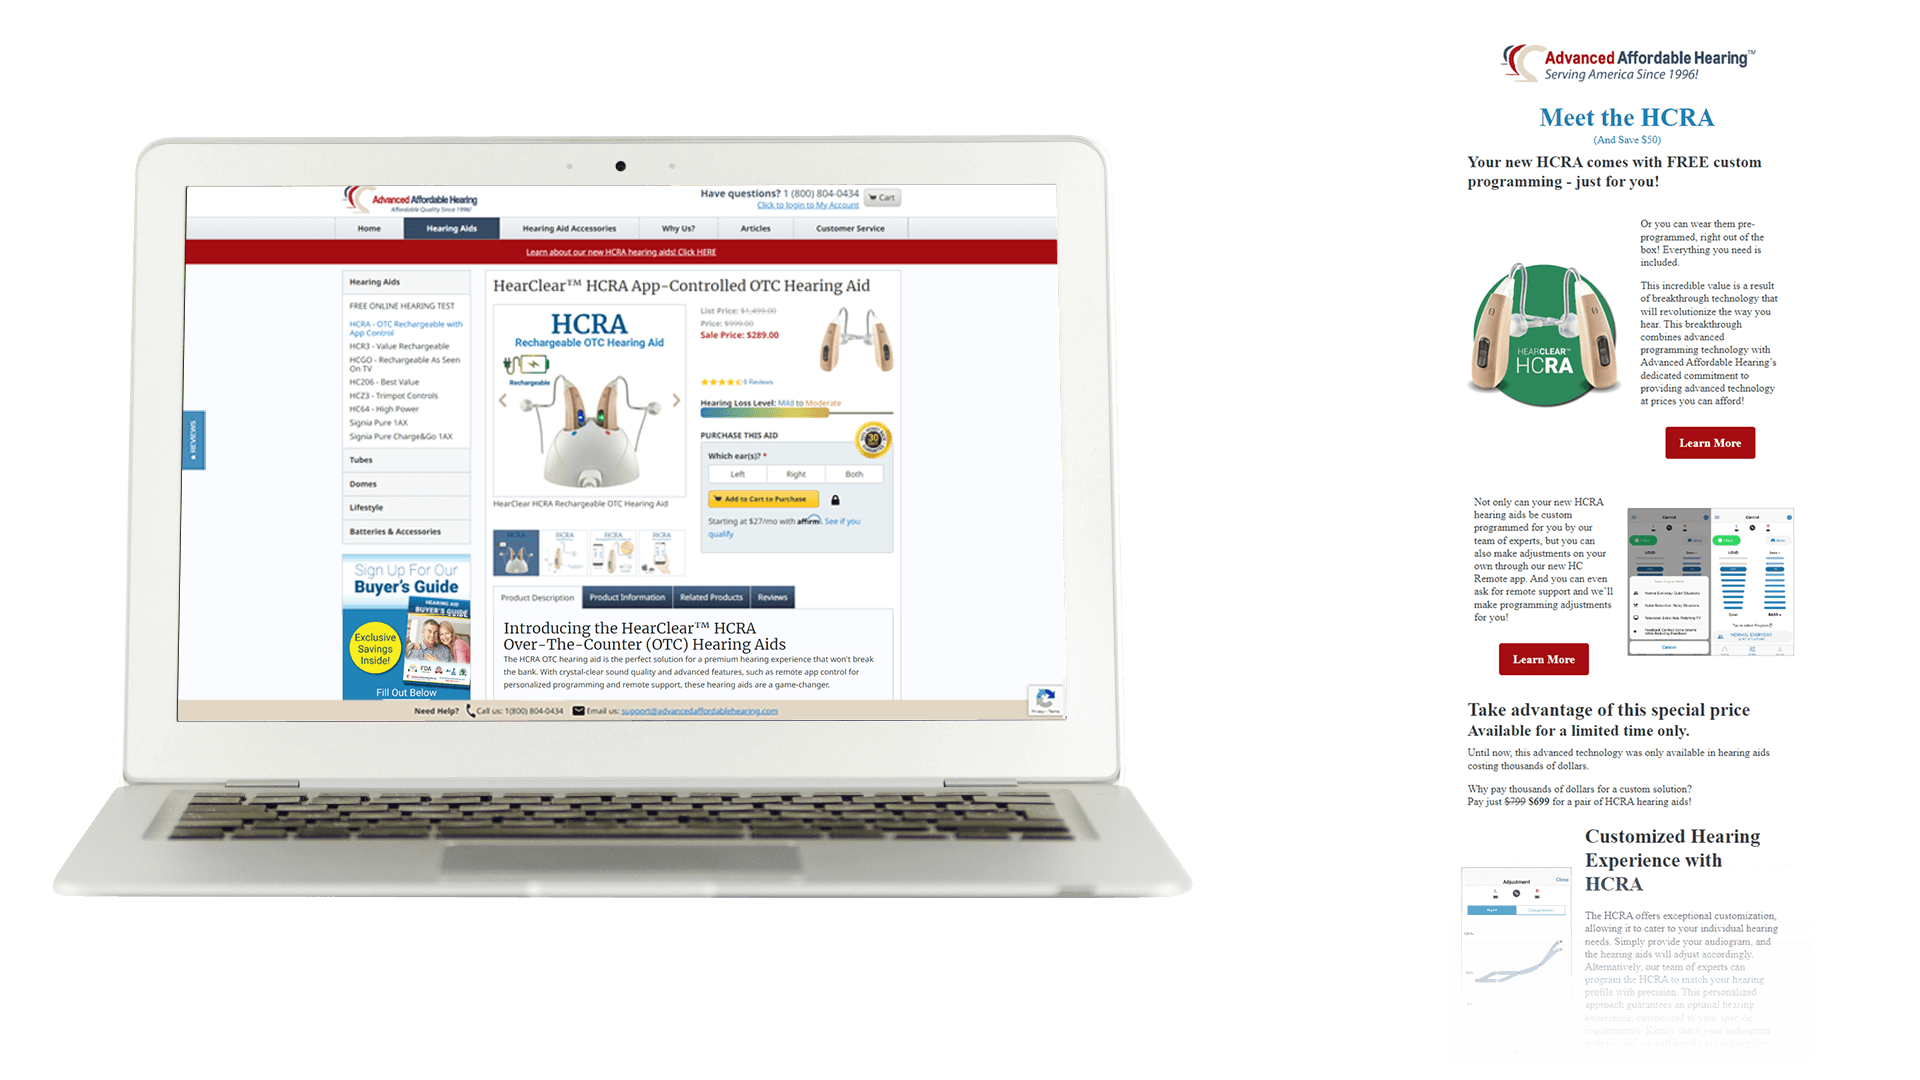 This image showcases a cohesive brand experience for HearClear™ HCRA, an advanced hearing aid offered by Advanced Affordable Hearing. On the left, you can see the HearClear™ HCRA product page on their Drupal 7 e-commerce website. On the right, an email introduces the same product, maintaining consistent visual elements and messaging. This demonstrates how Cat's Imaging & Design ensured a unified brand identity across different touchpoints.